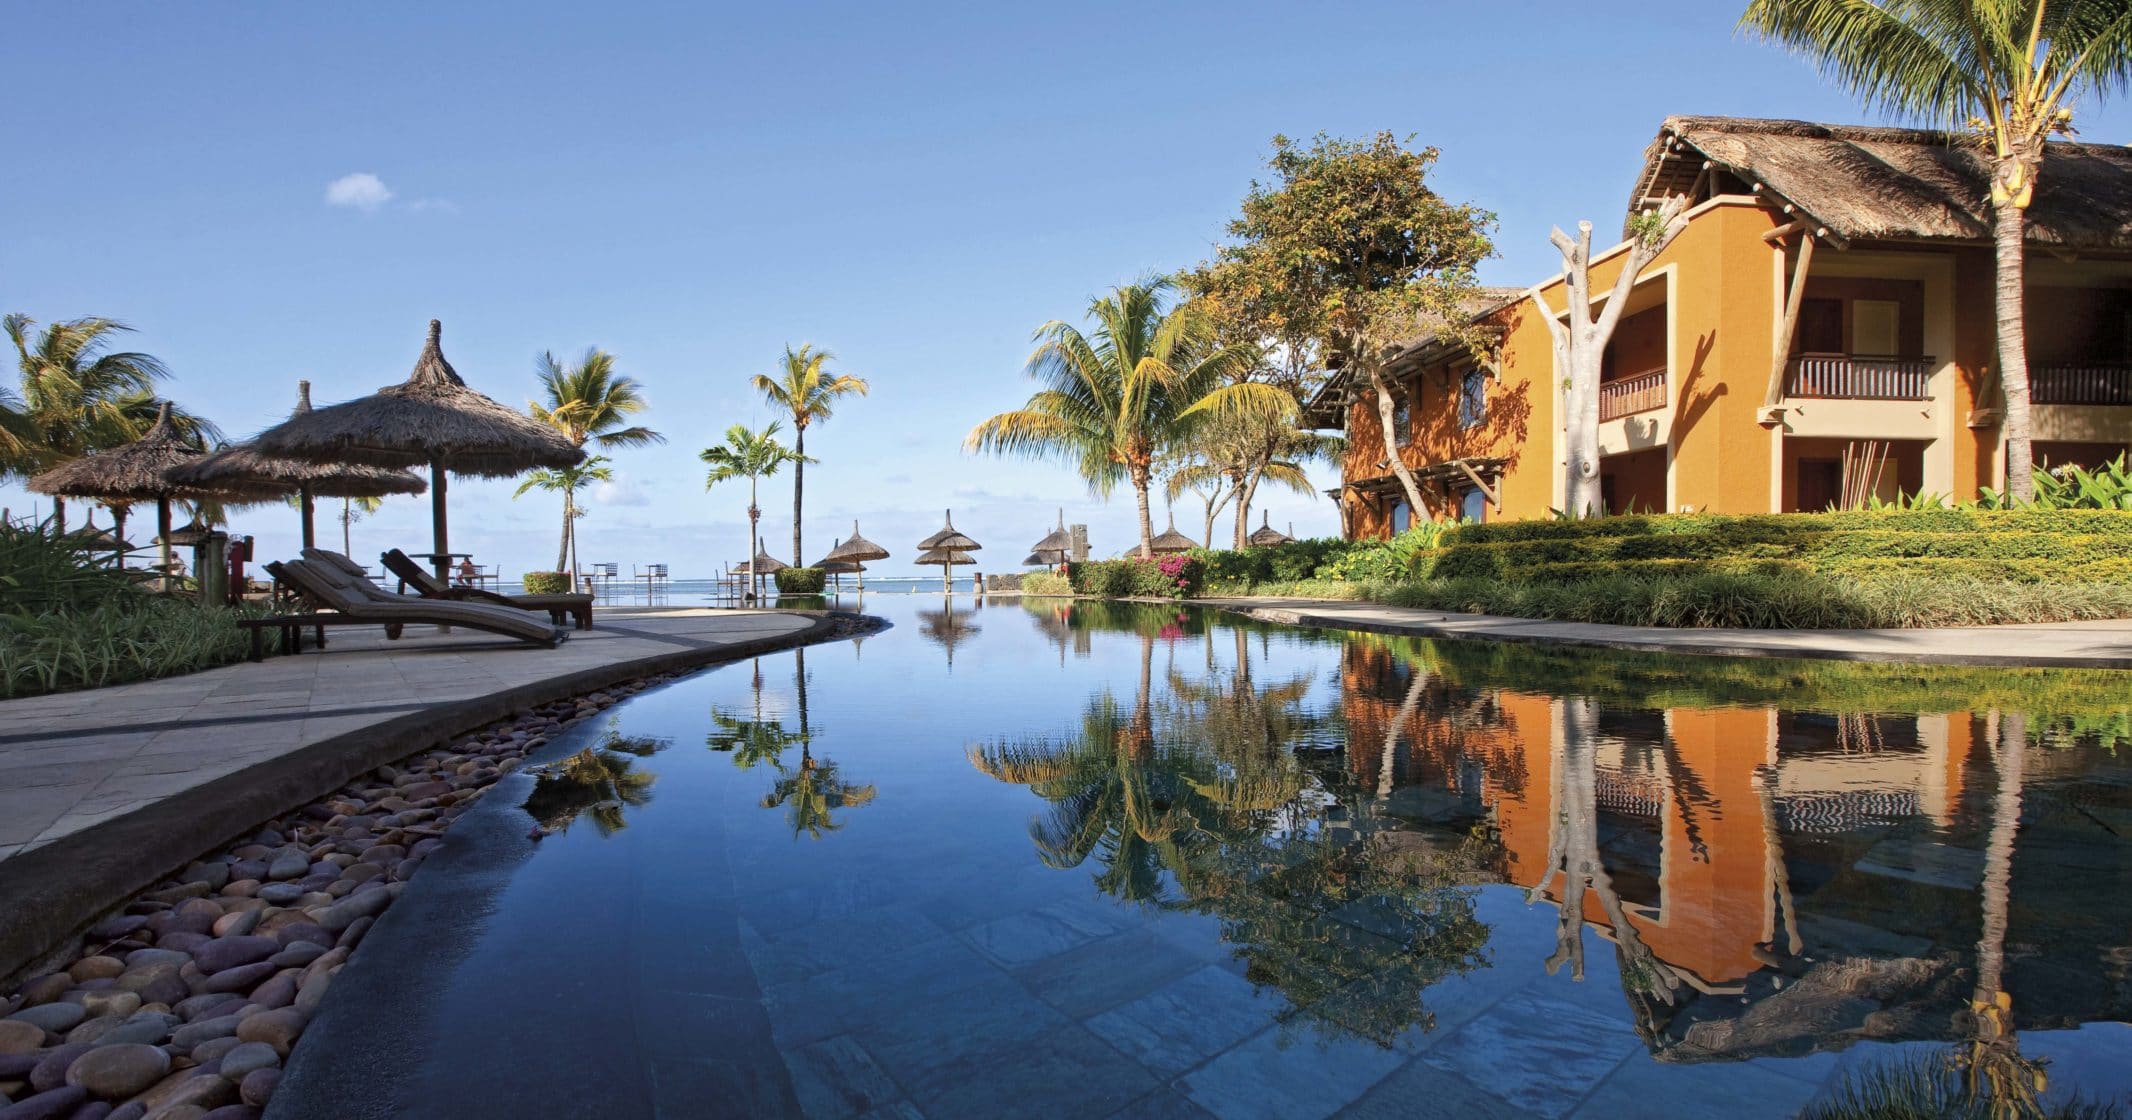 Choose between the pools and the sea at the Heritage Awali